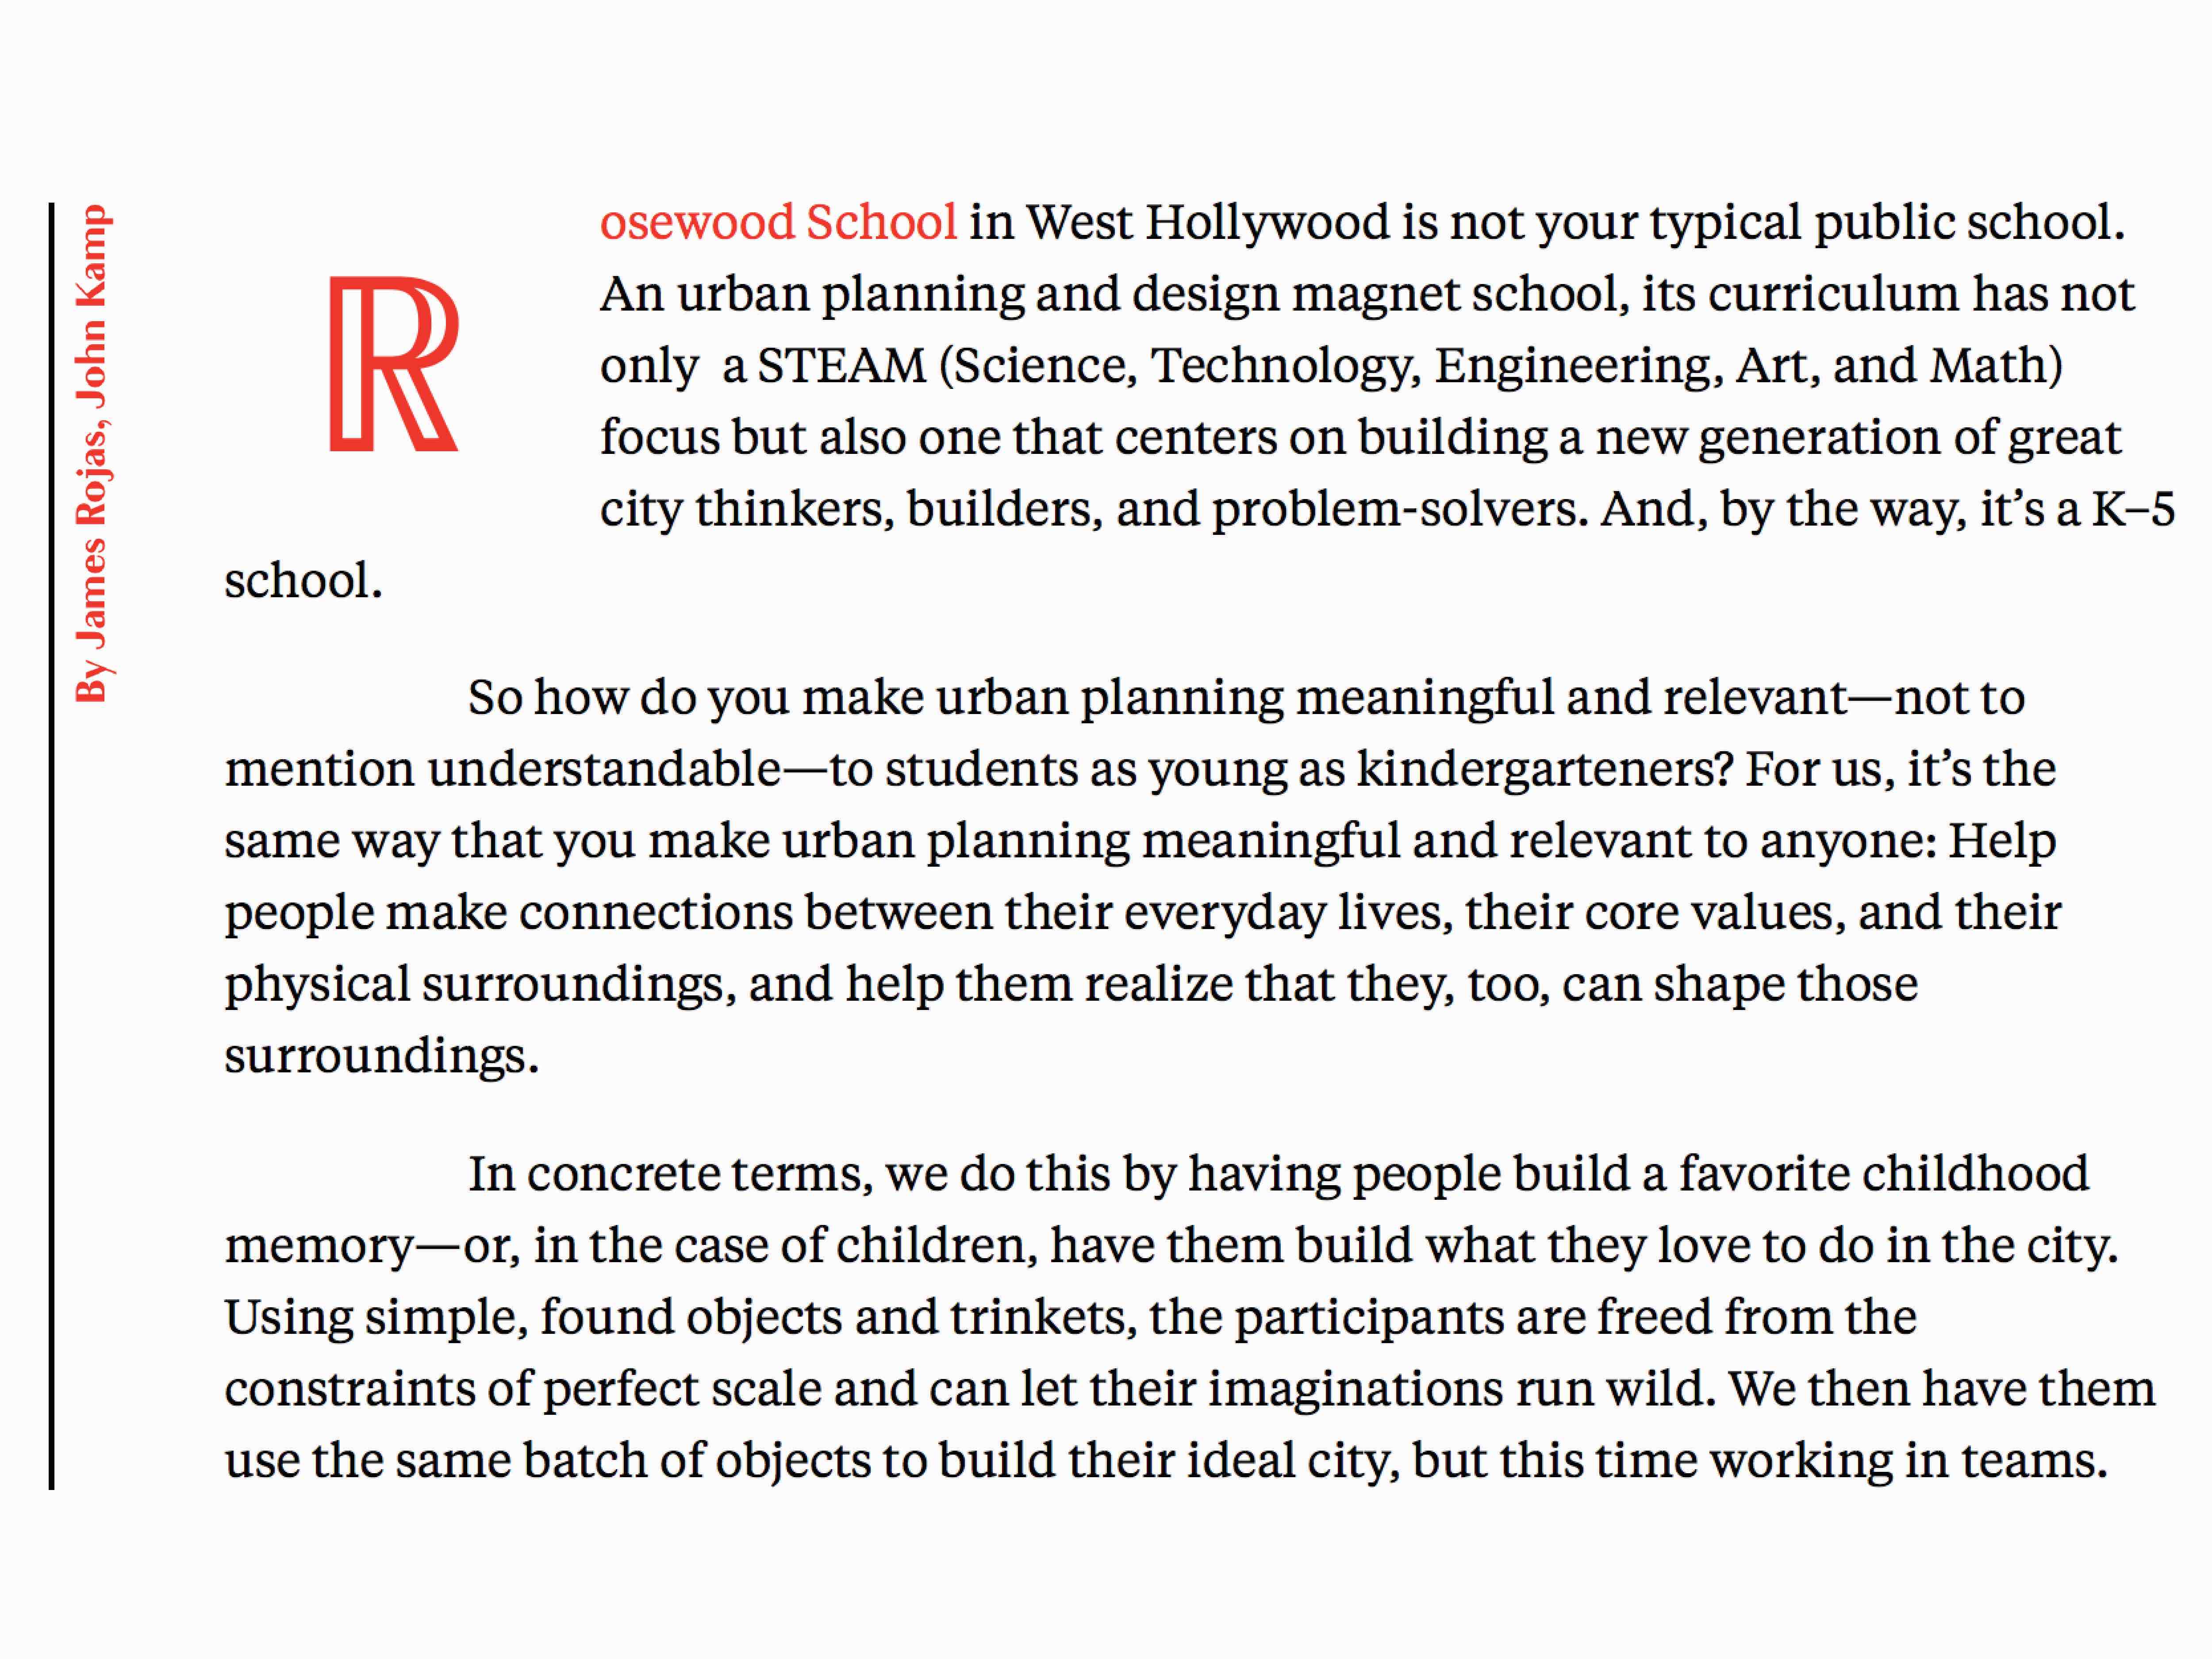 Excerpt from the article for CommonEdge on engaging kids in urban planning through play.